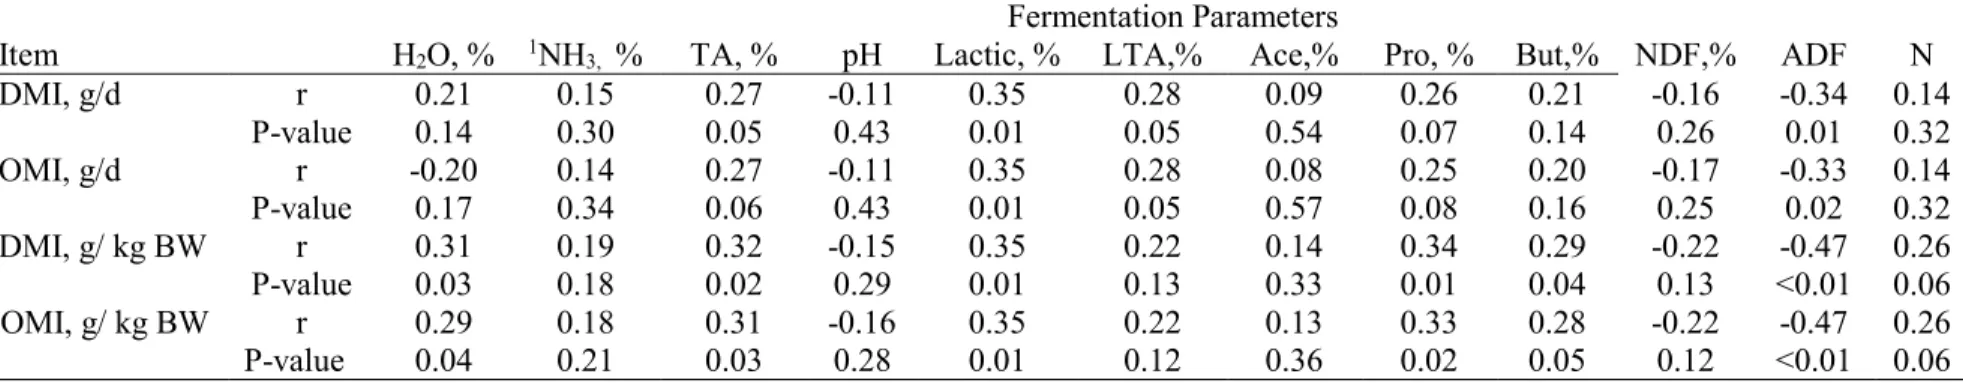 Table 3.1: Pearson correlation coefficients between fermentation characteristics and intake measurements of alfalfa silage  in gestating sheep